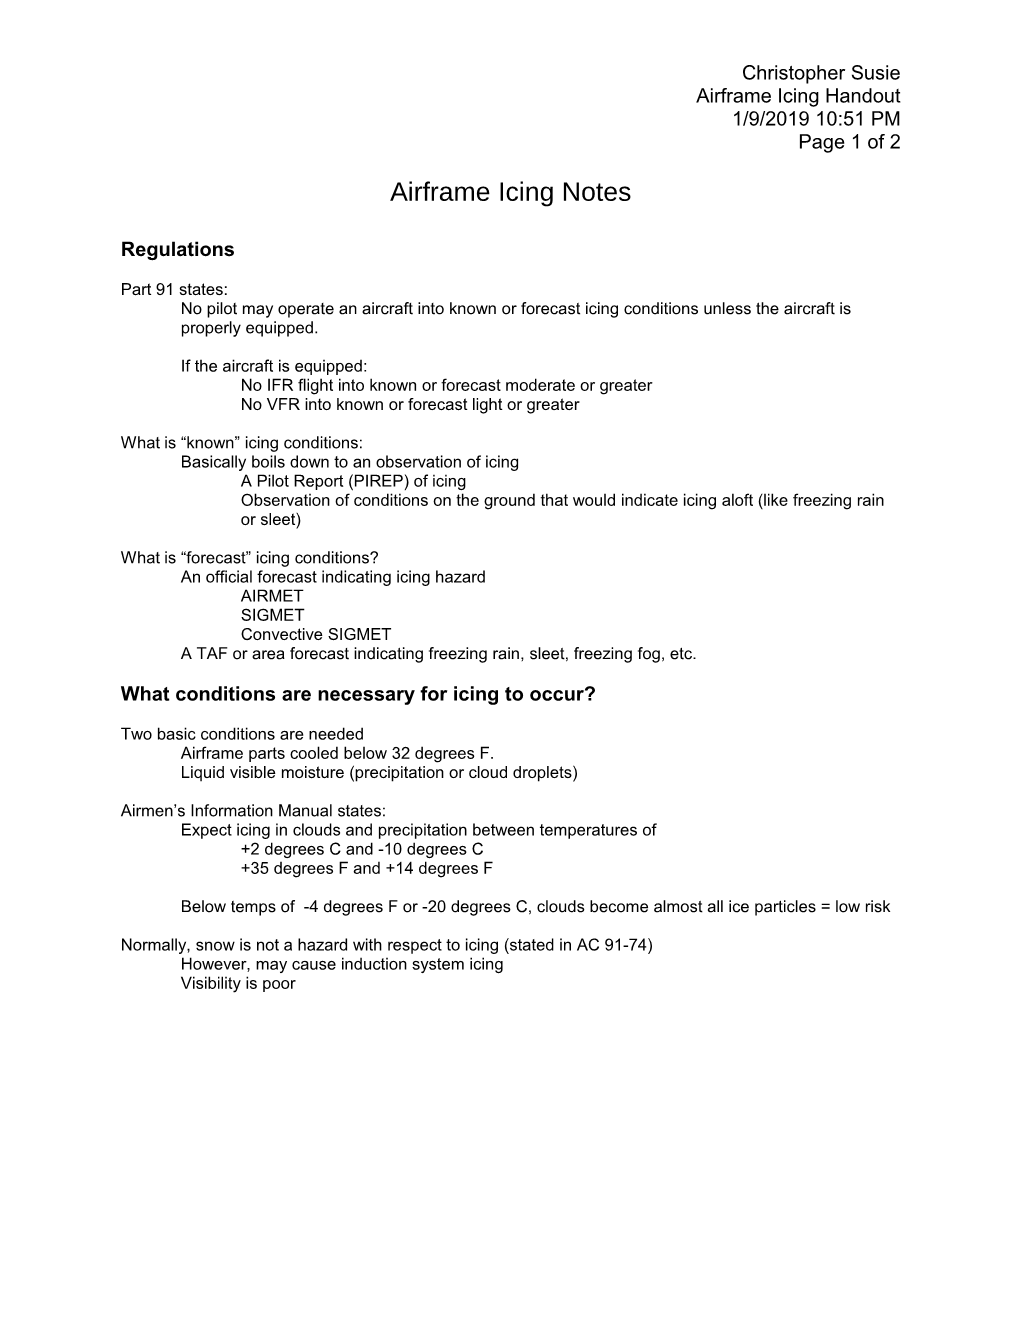 Airframe Icing Notes